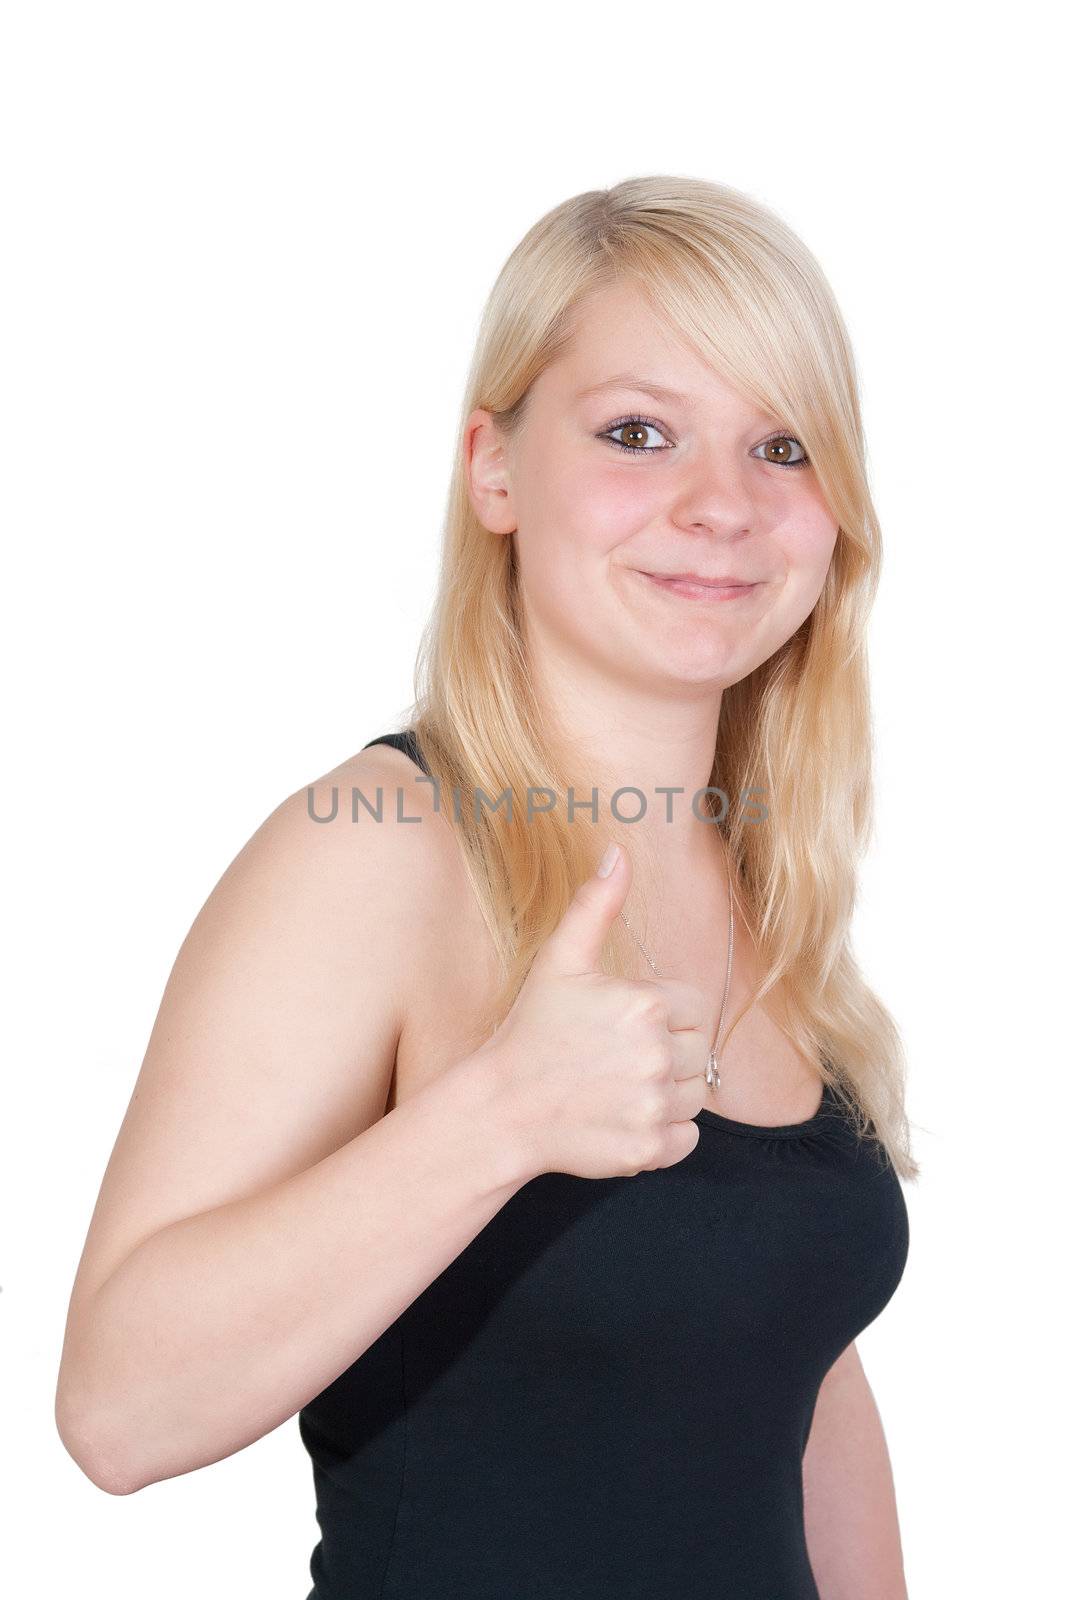 young blonde woman showing thumb up gesture - isolated on white background